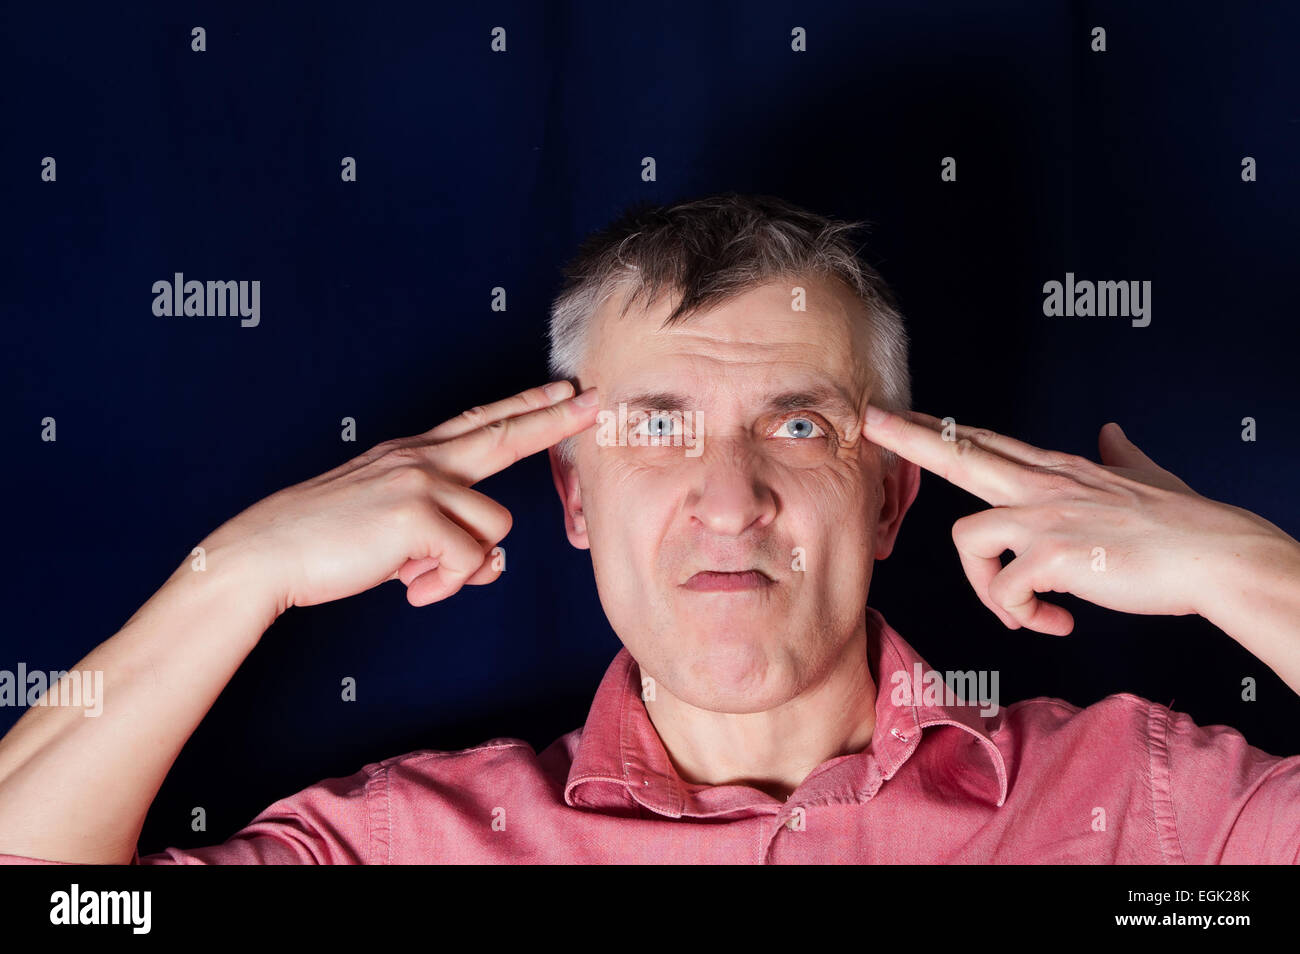 Studio portrait of a man pointing hand gun at his own head, concept of desperation Stock Photo